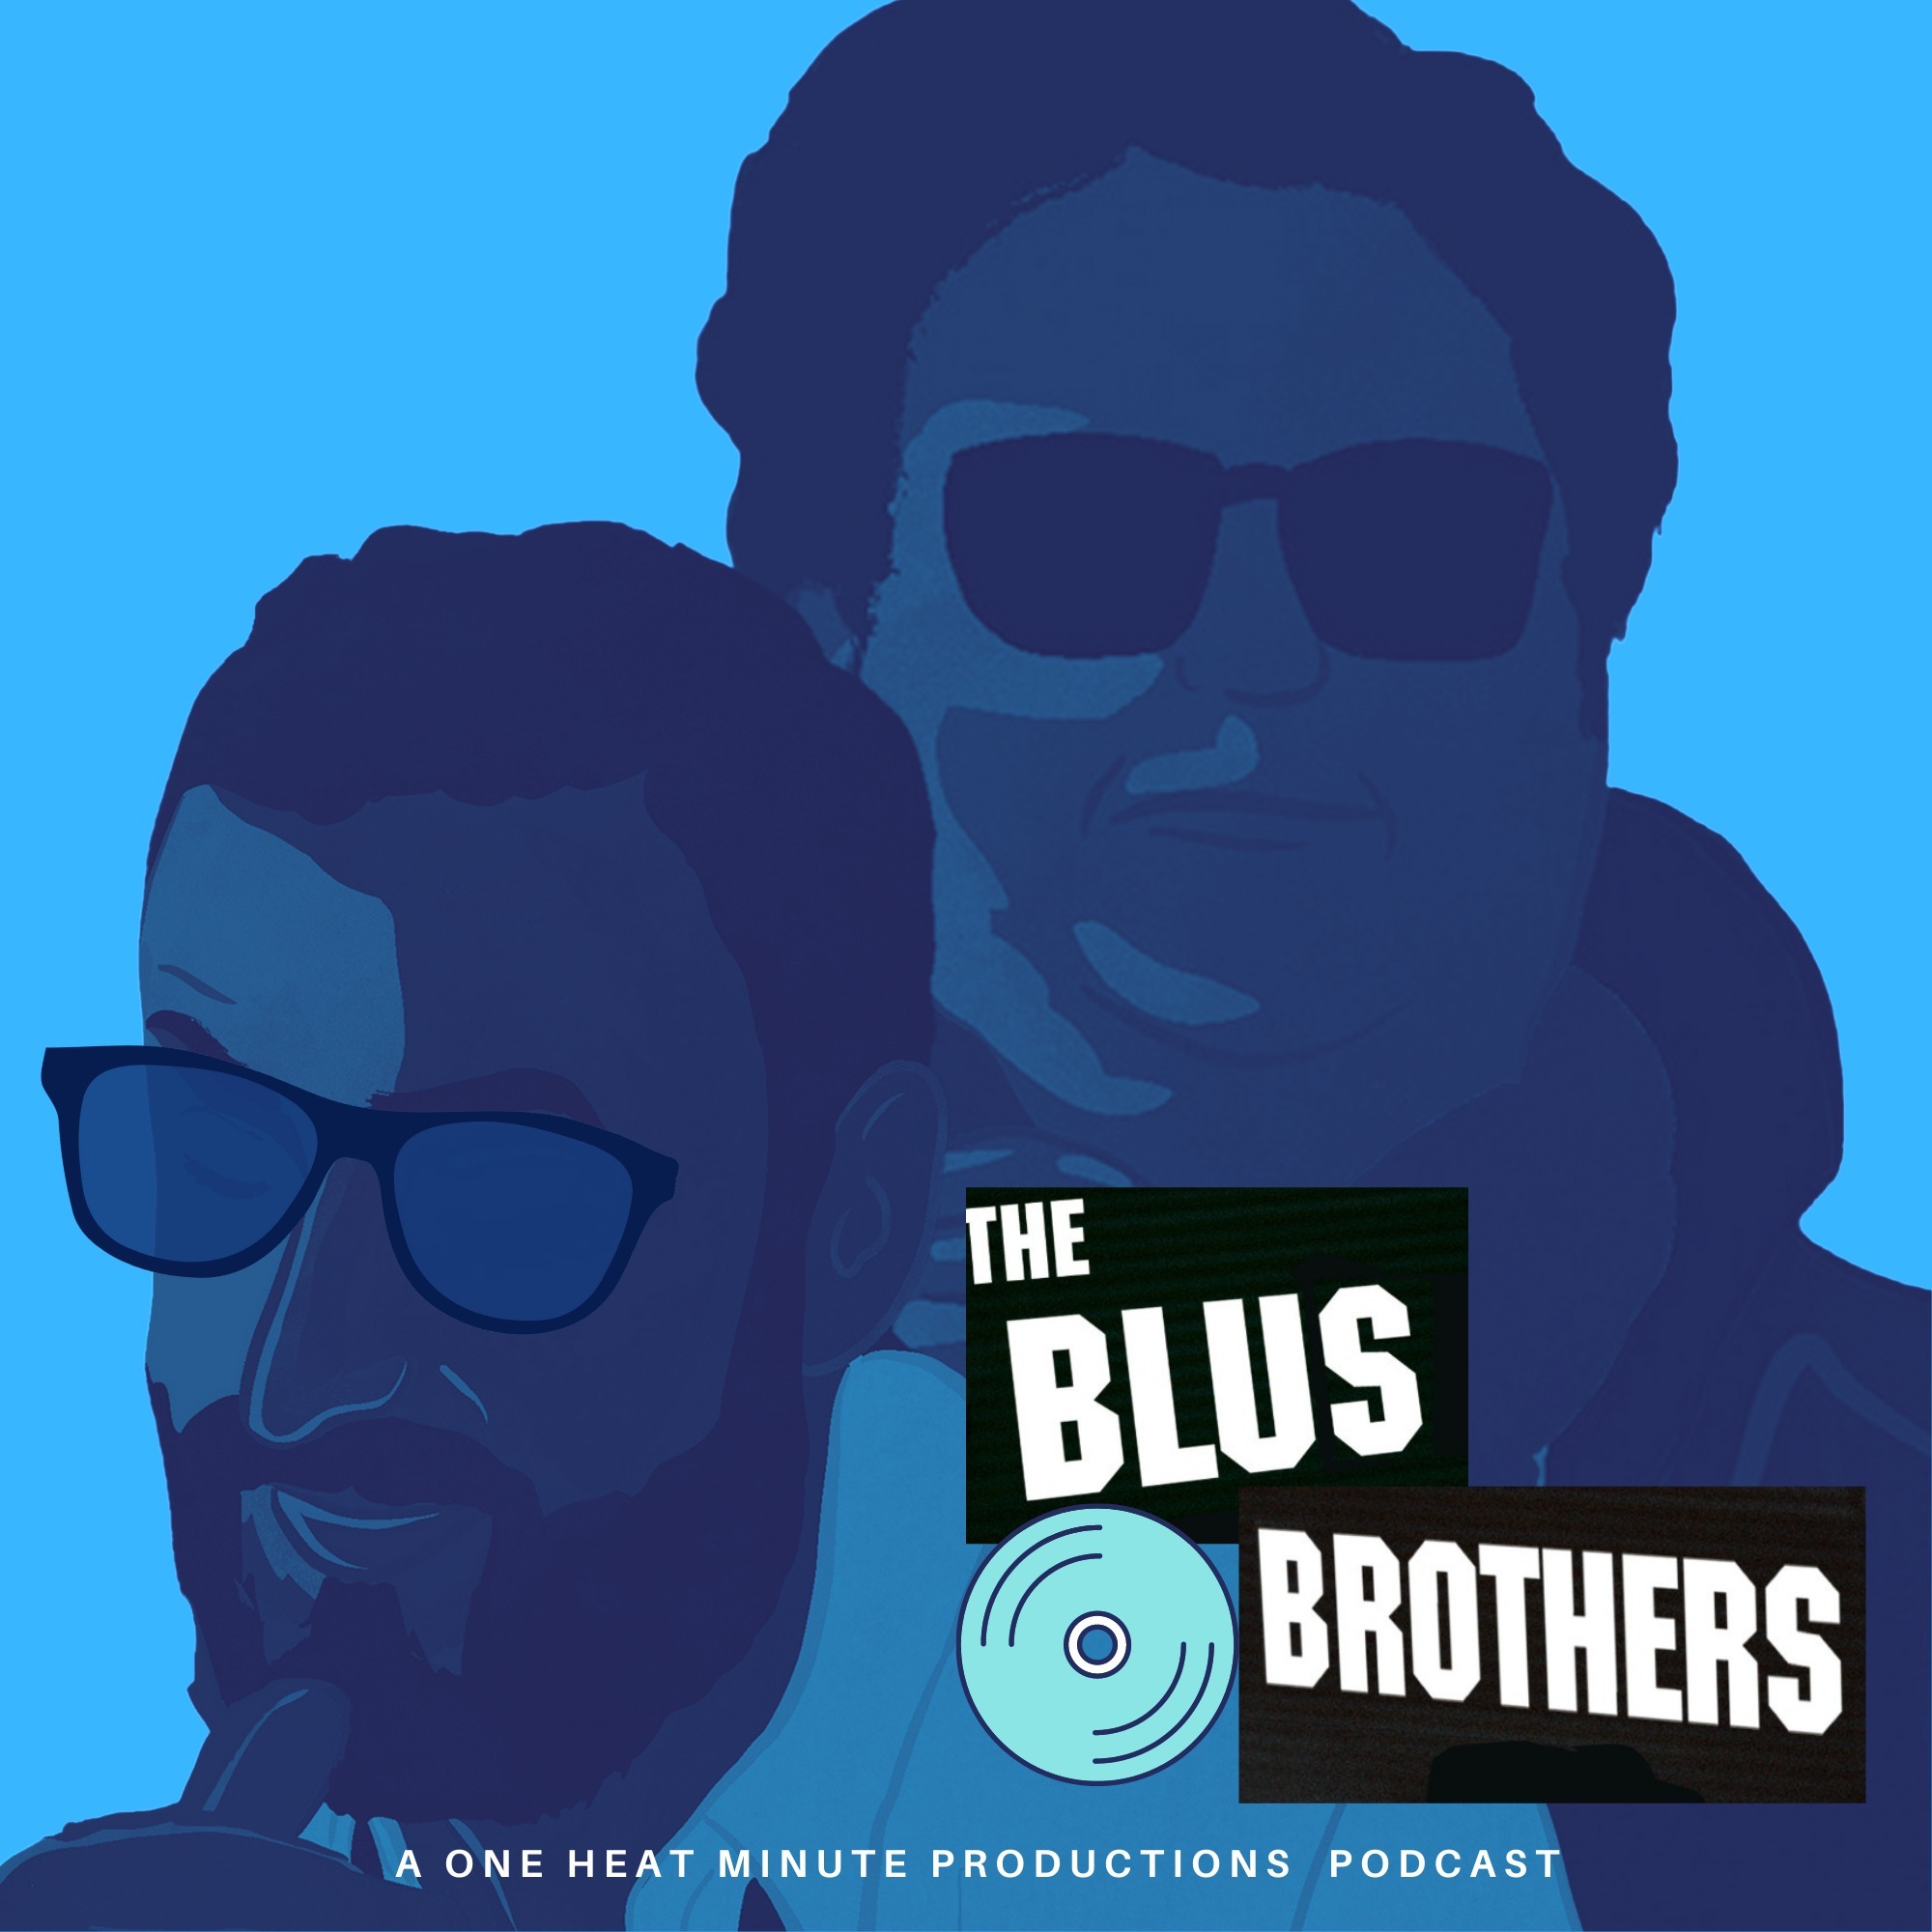 THE BLUS BROTHERS: IMPRINT FILMS - THE CATMAN OF PARIS + UP TIGHT + THE LONG VOYAGE HOME + BUS RILEY'S BACK IN TOWN